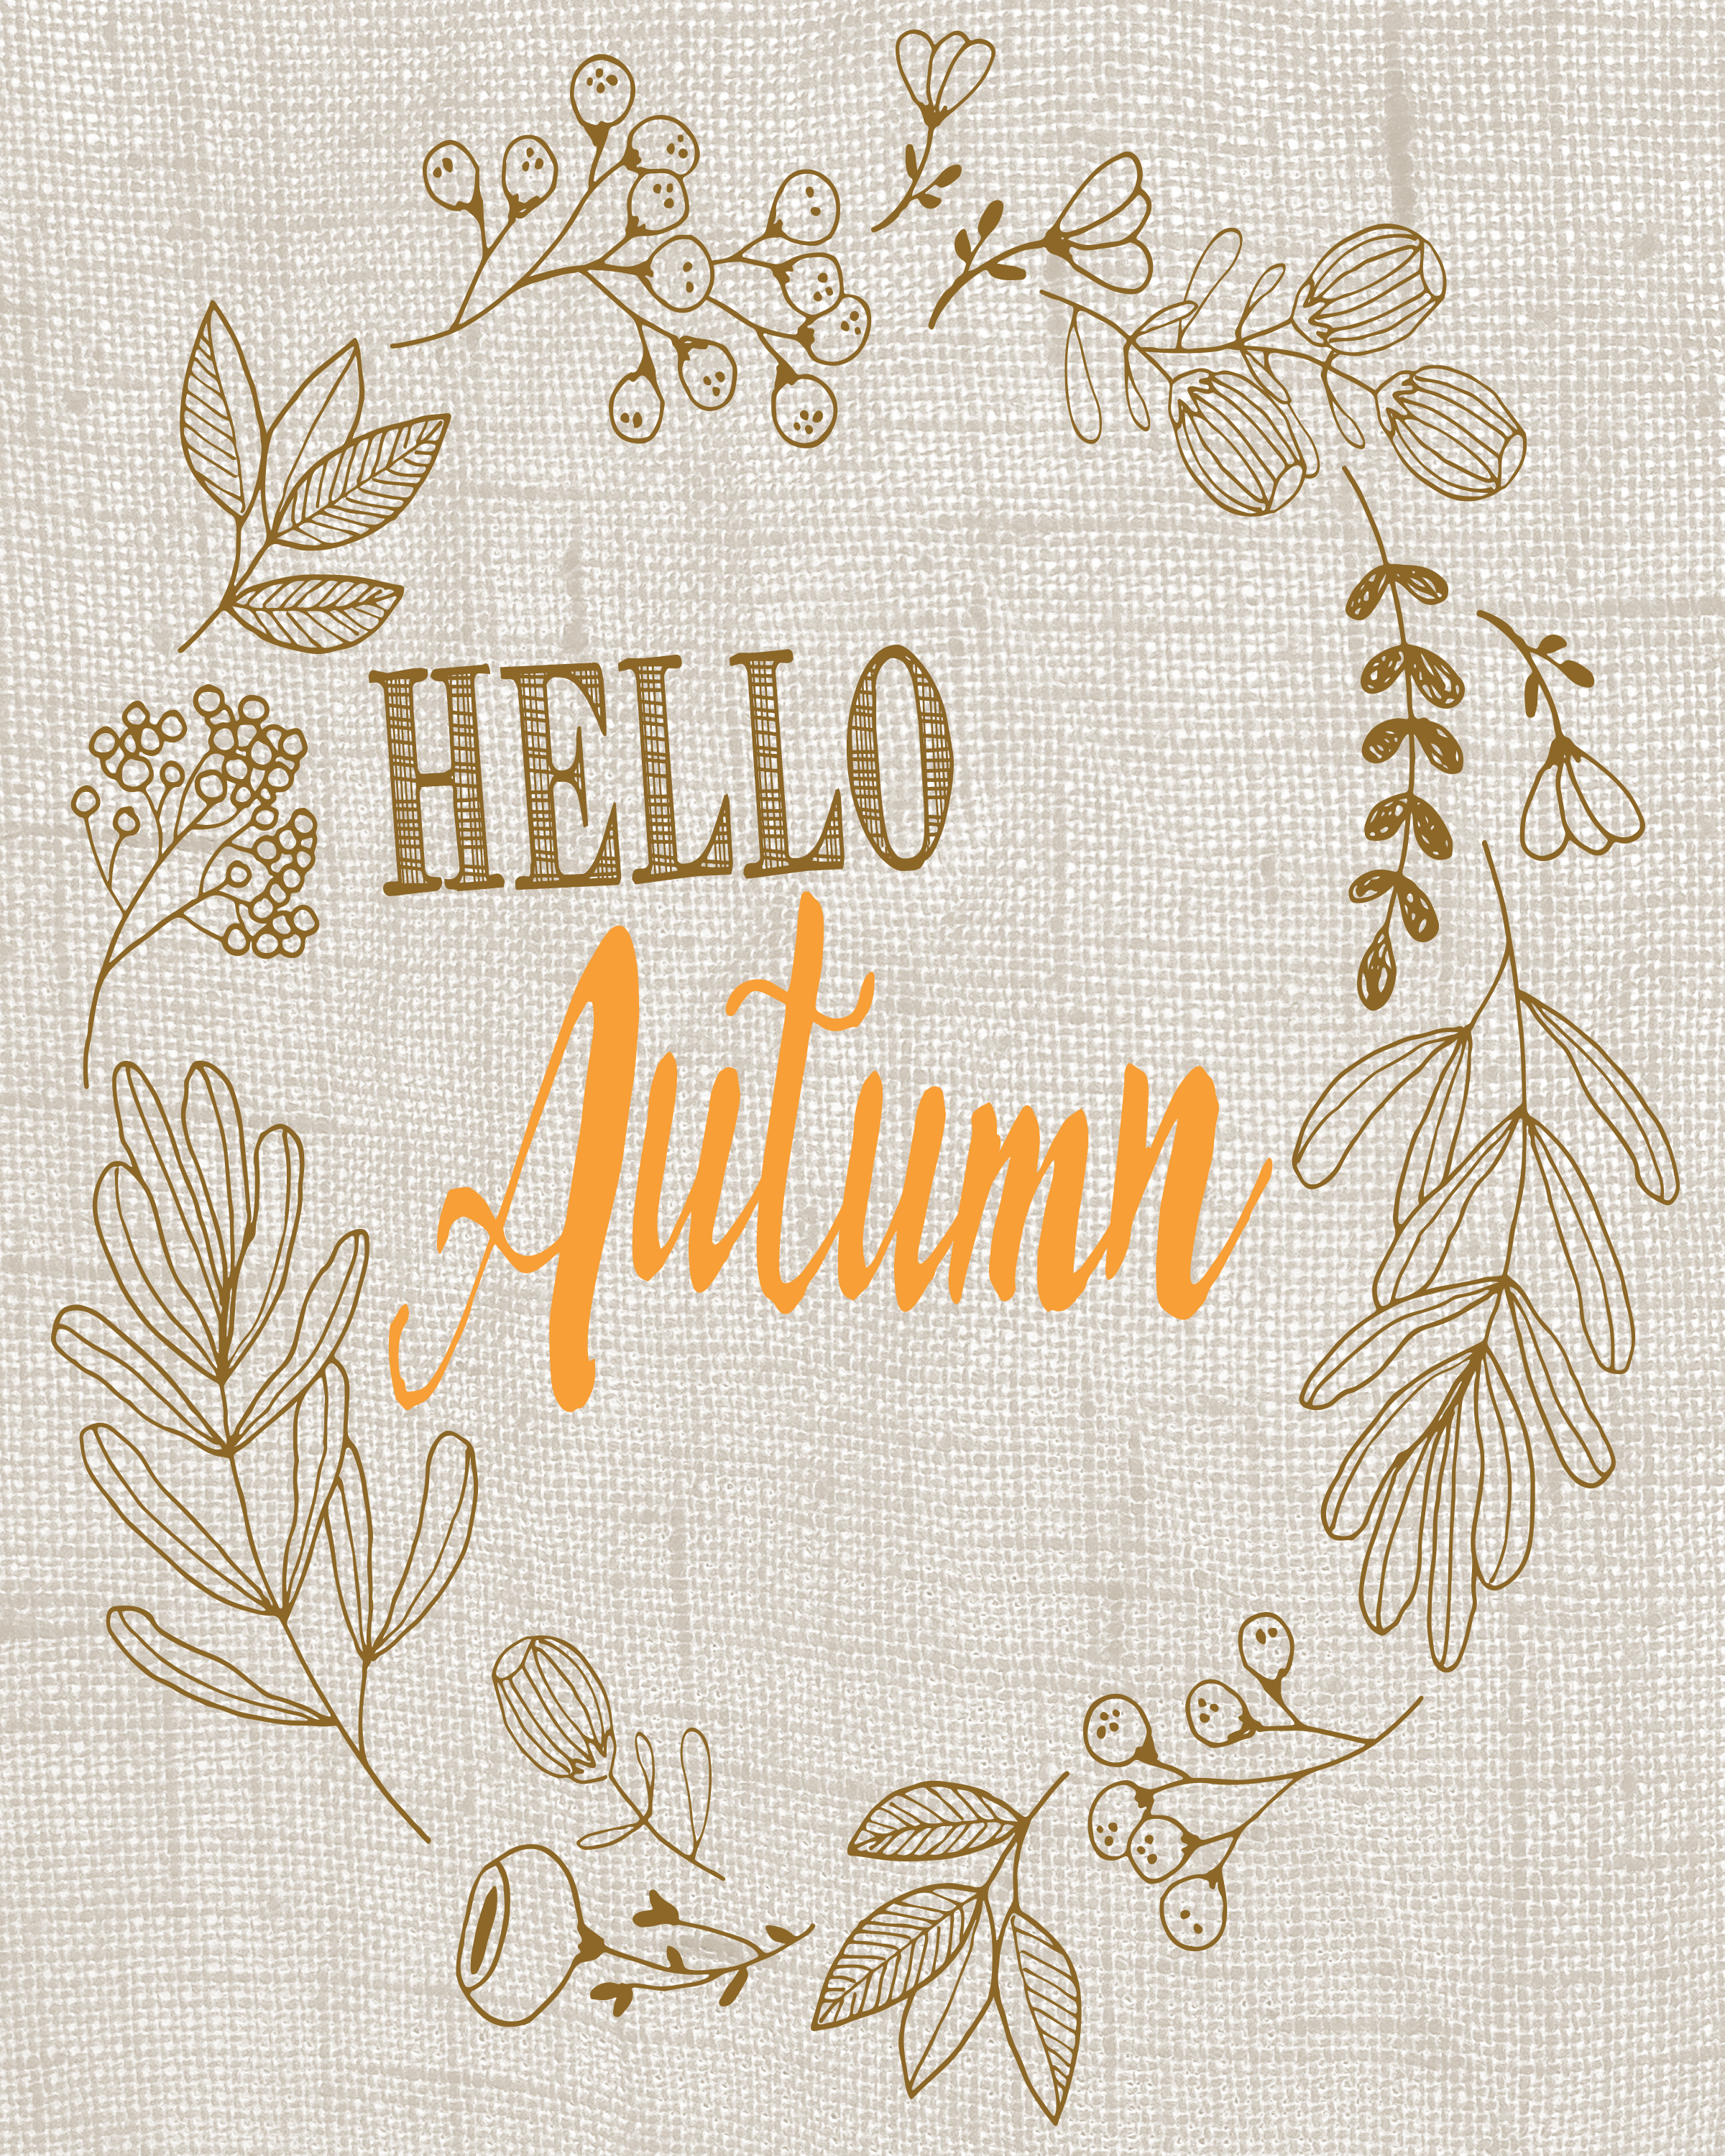 Hello Autumn 8x10 Free Printable from Rays of Bliss